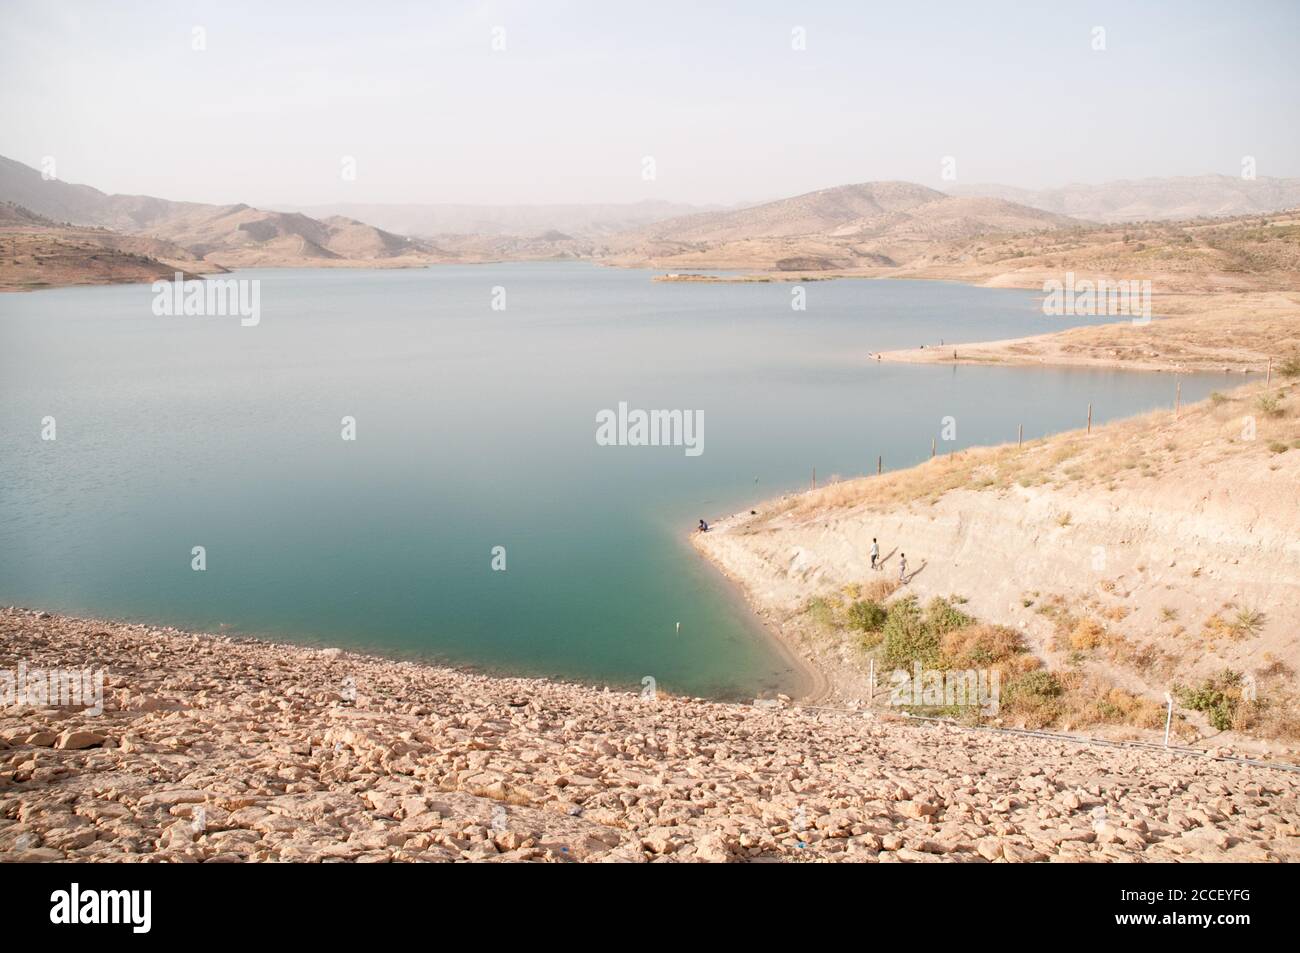 The view from the top of the Duhok Dam and reservoir below, in the Tigris River basin, in the Kurdistan Autonomous Region of the Northern Iraq. Stock Photo